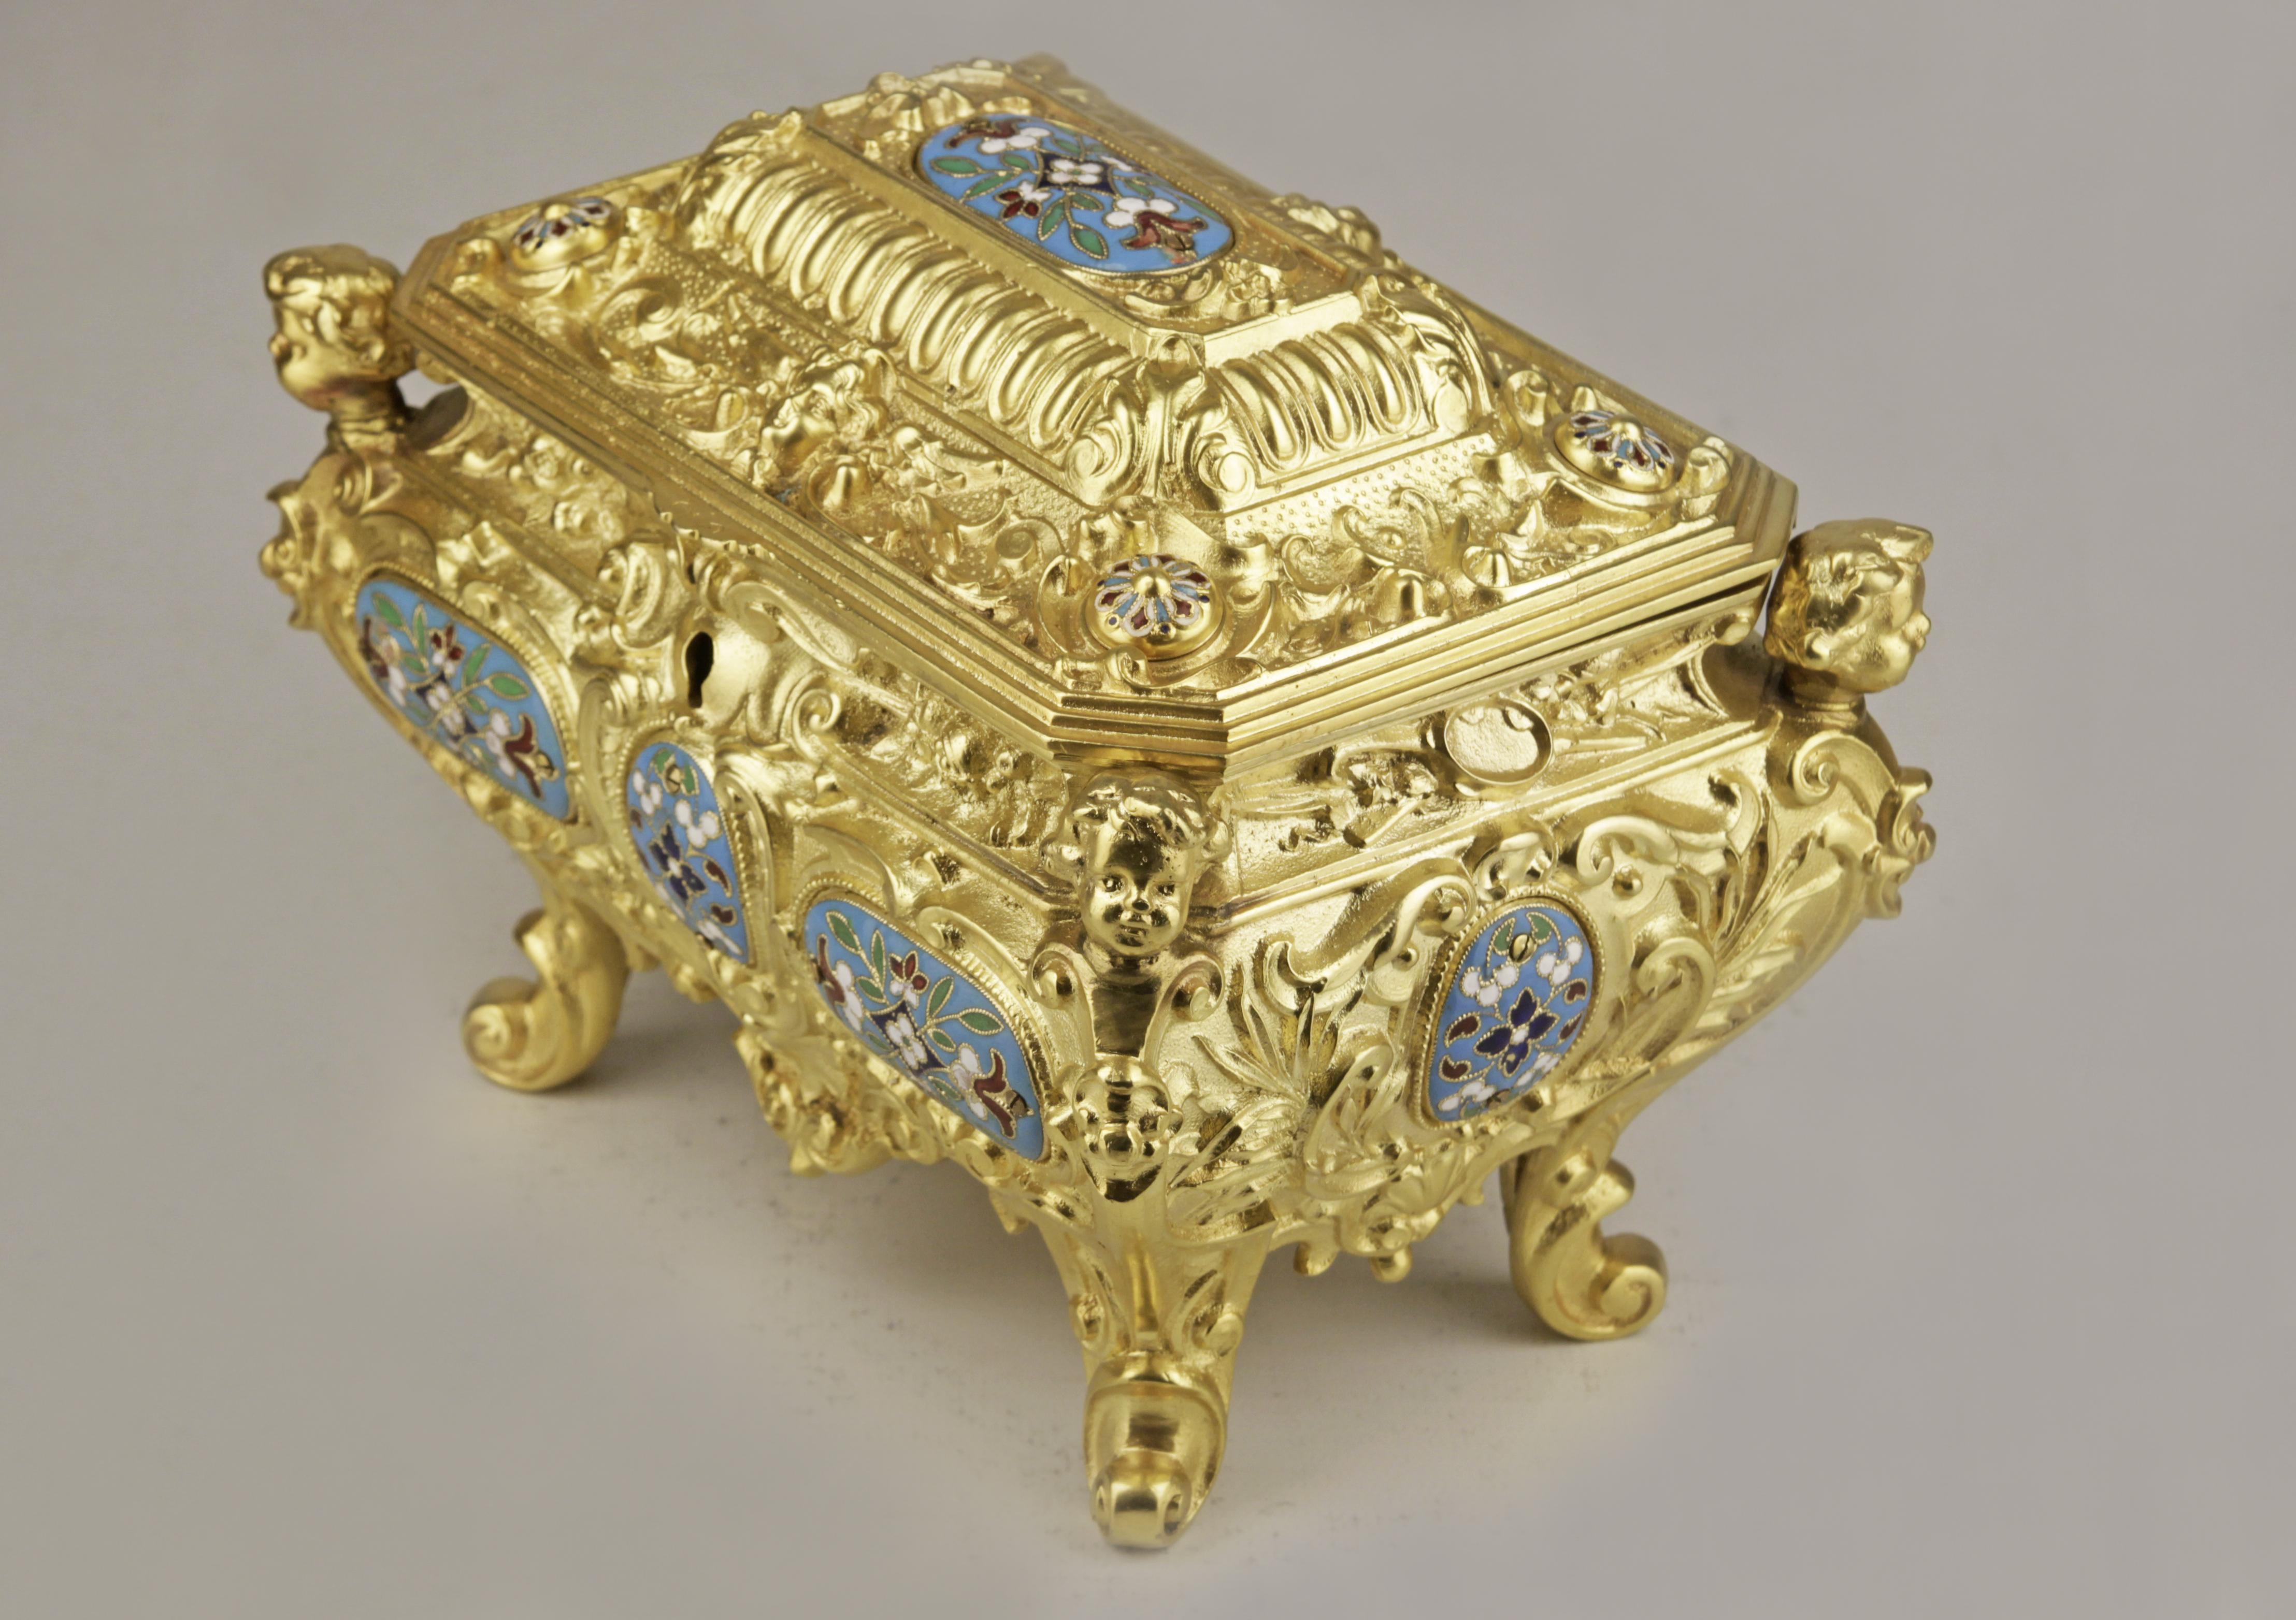 Molded 19th Century French Empire Cloisonné Bronze Jewelry Casket with Velvet Interior For Sale